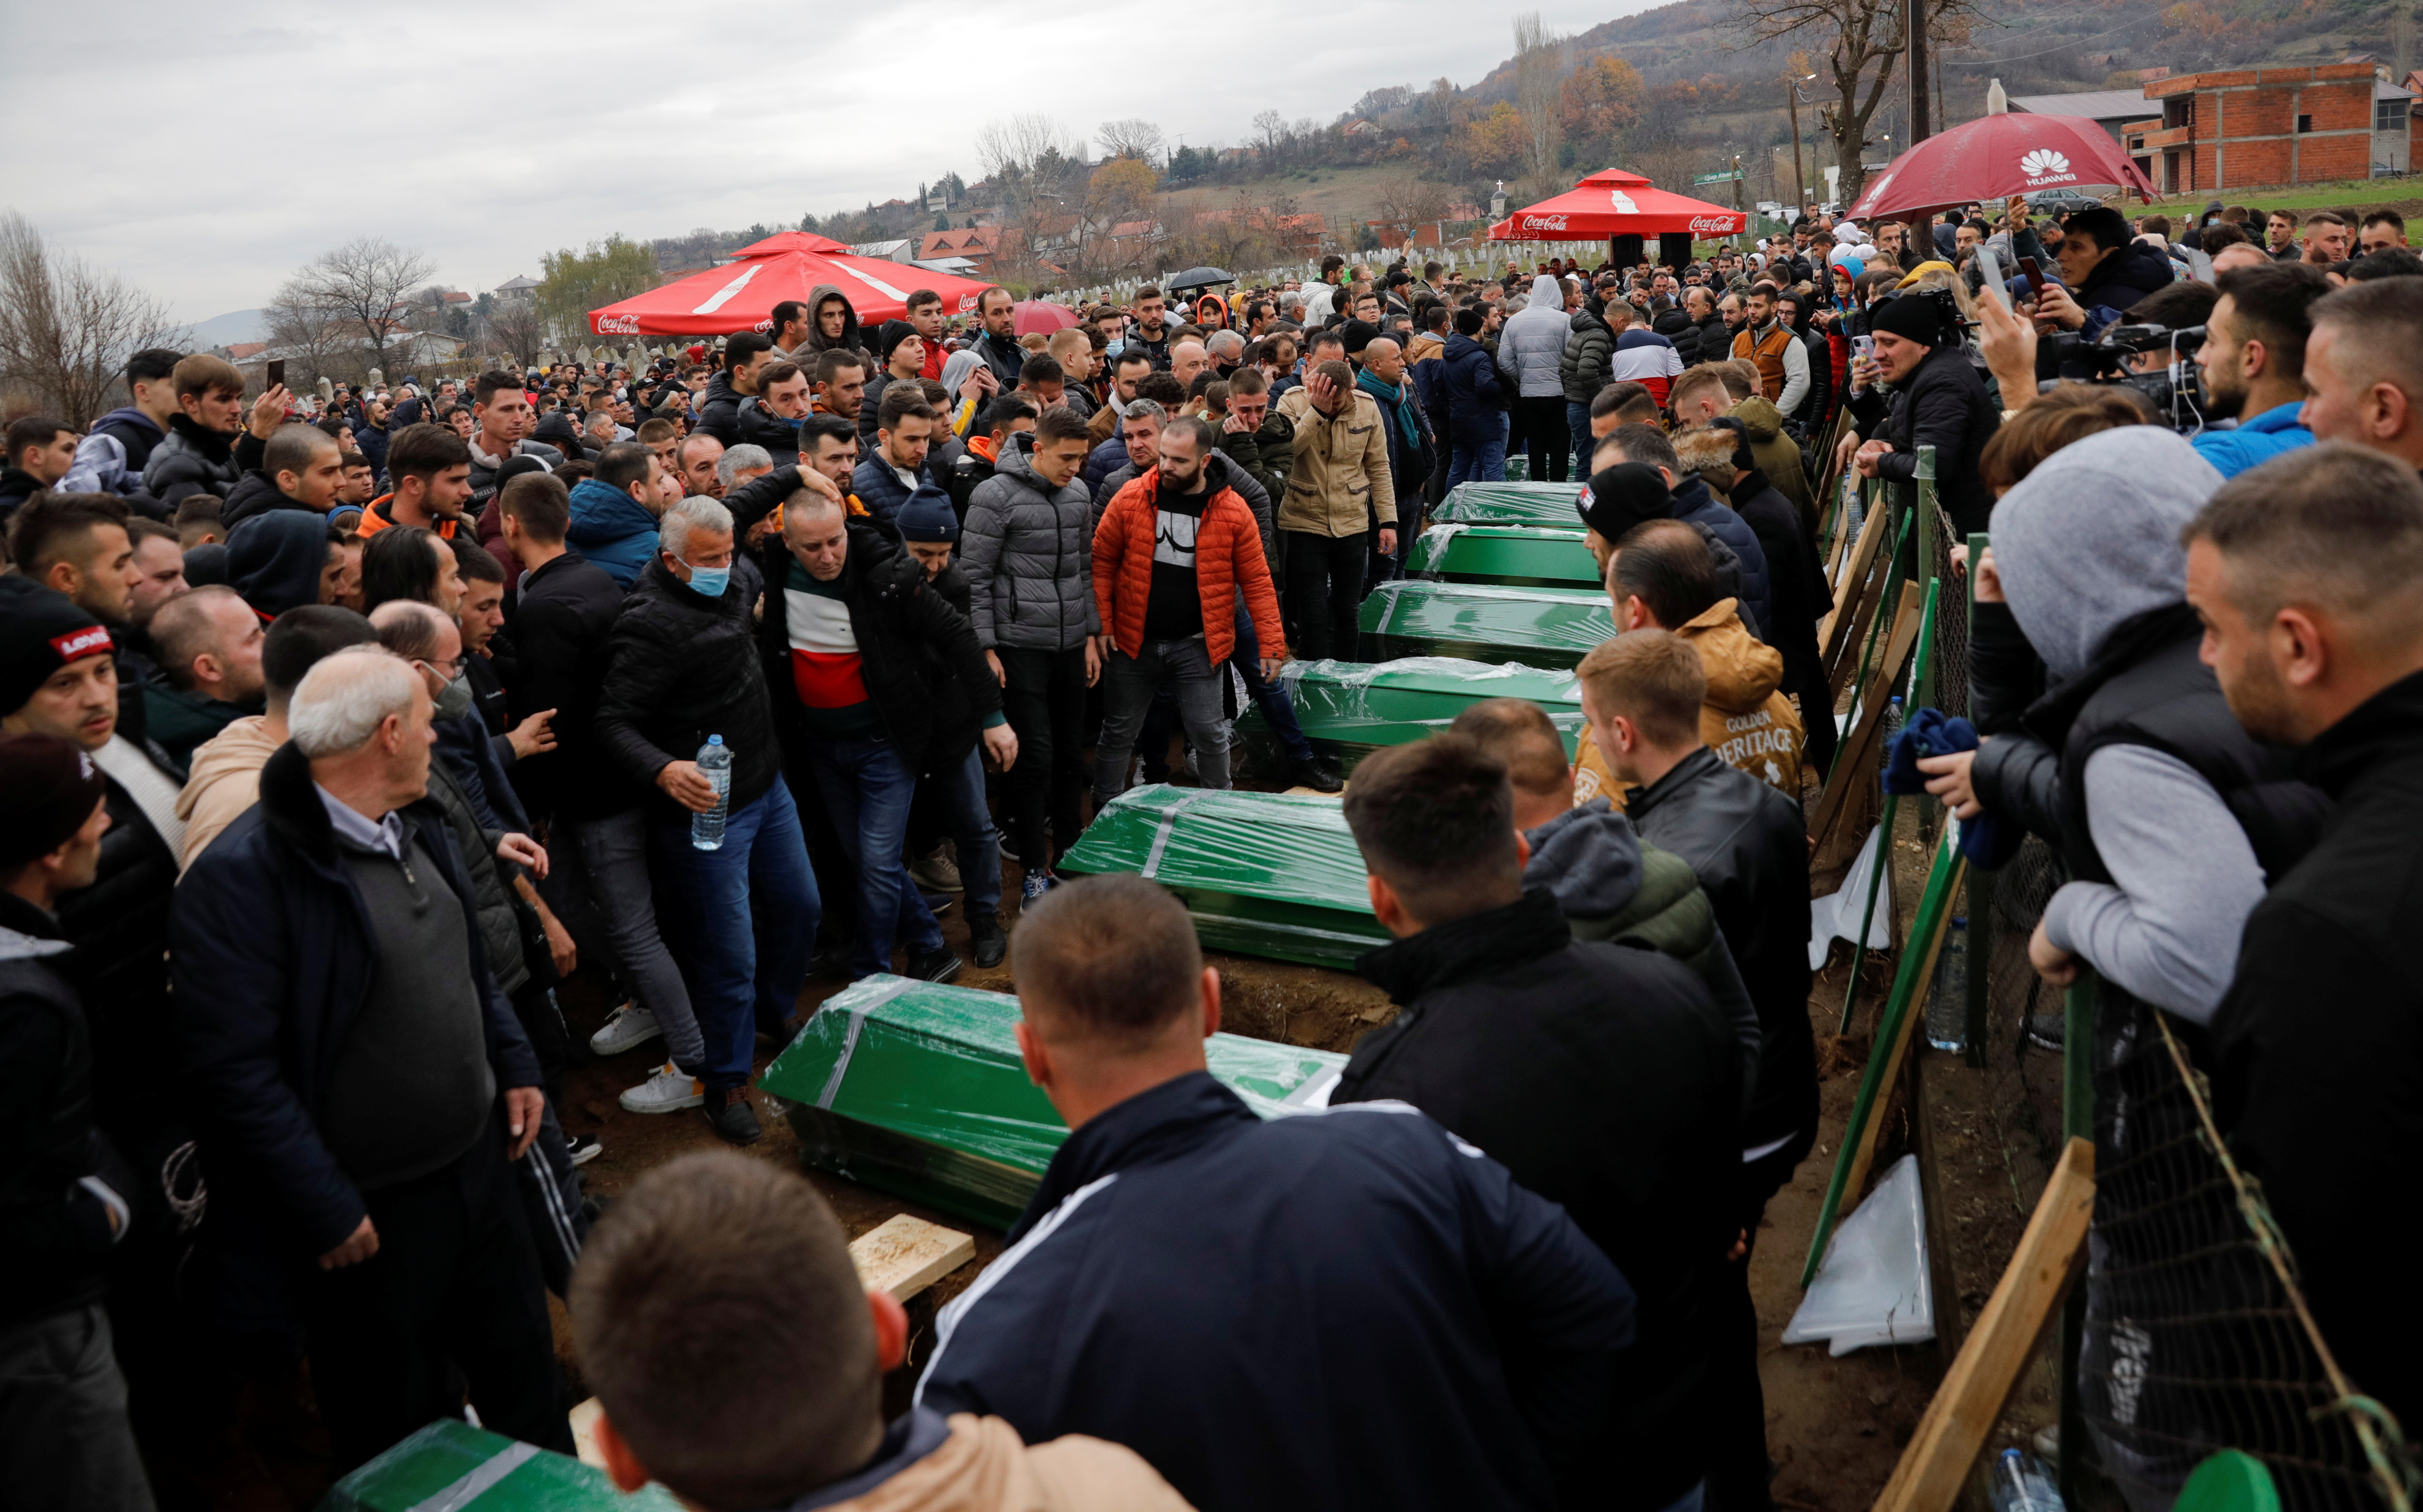 People mourn by the coffins during the burial ceremony for the victims of last week's deadly bus crash in Bulgaria, in the village of Morane, near Skopje, North Macedonia December 3, 2021. REUTERS/Ognen Teofilovski